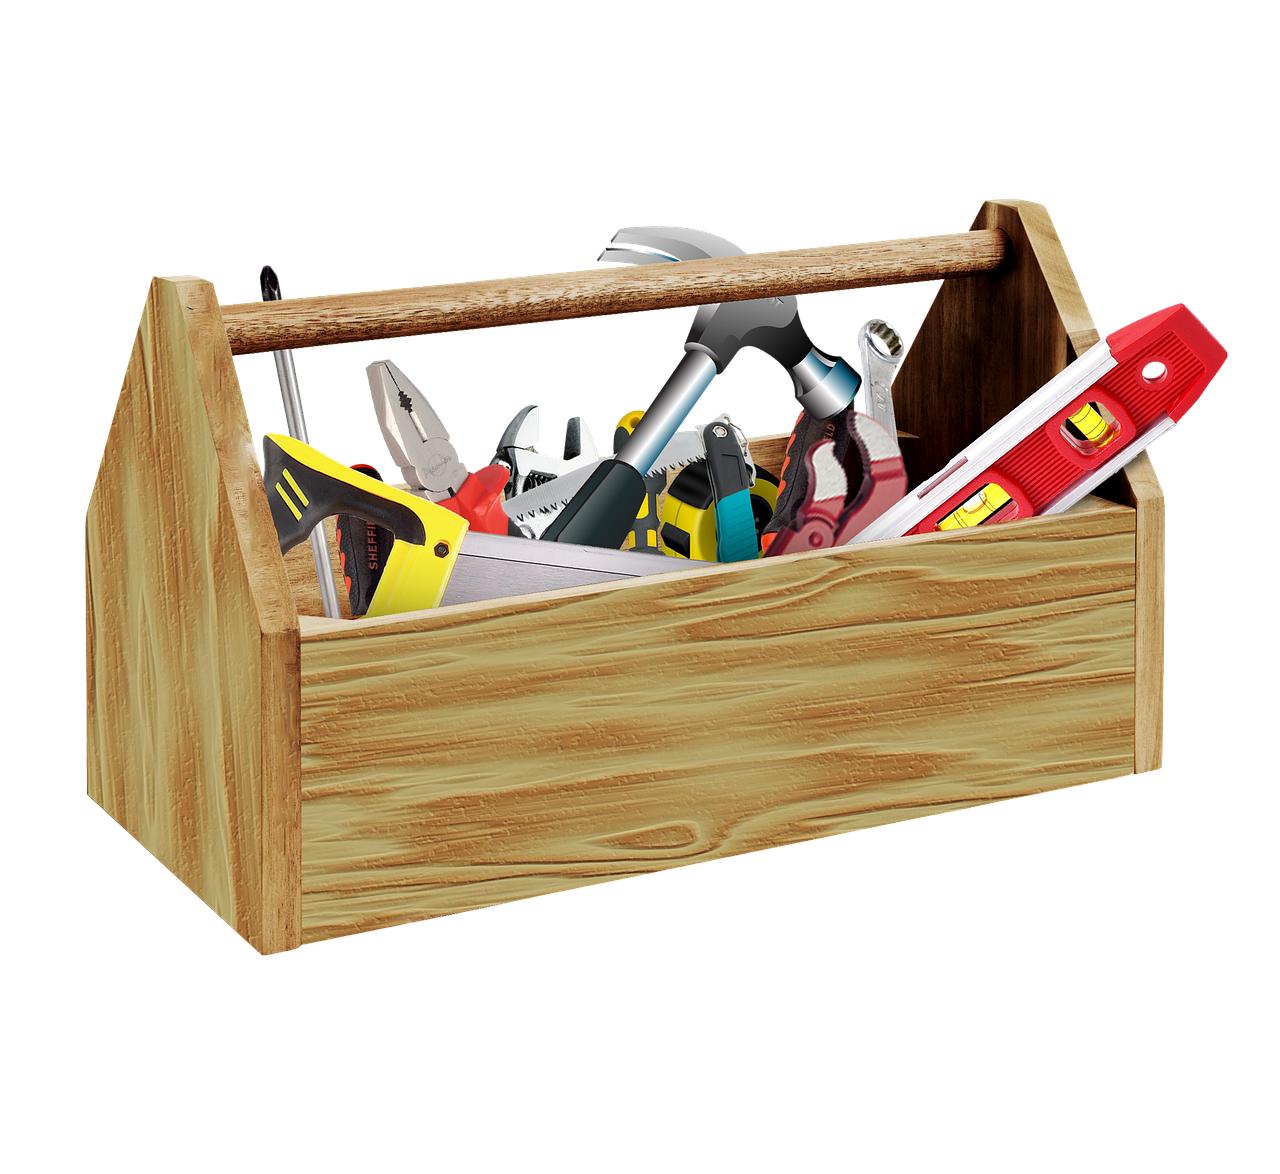 How to Stock Your Toolbox for Basic Home Repairs